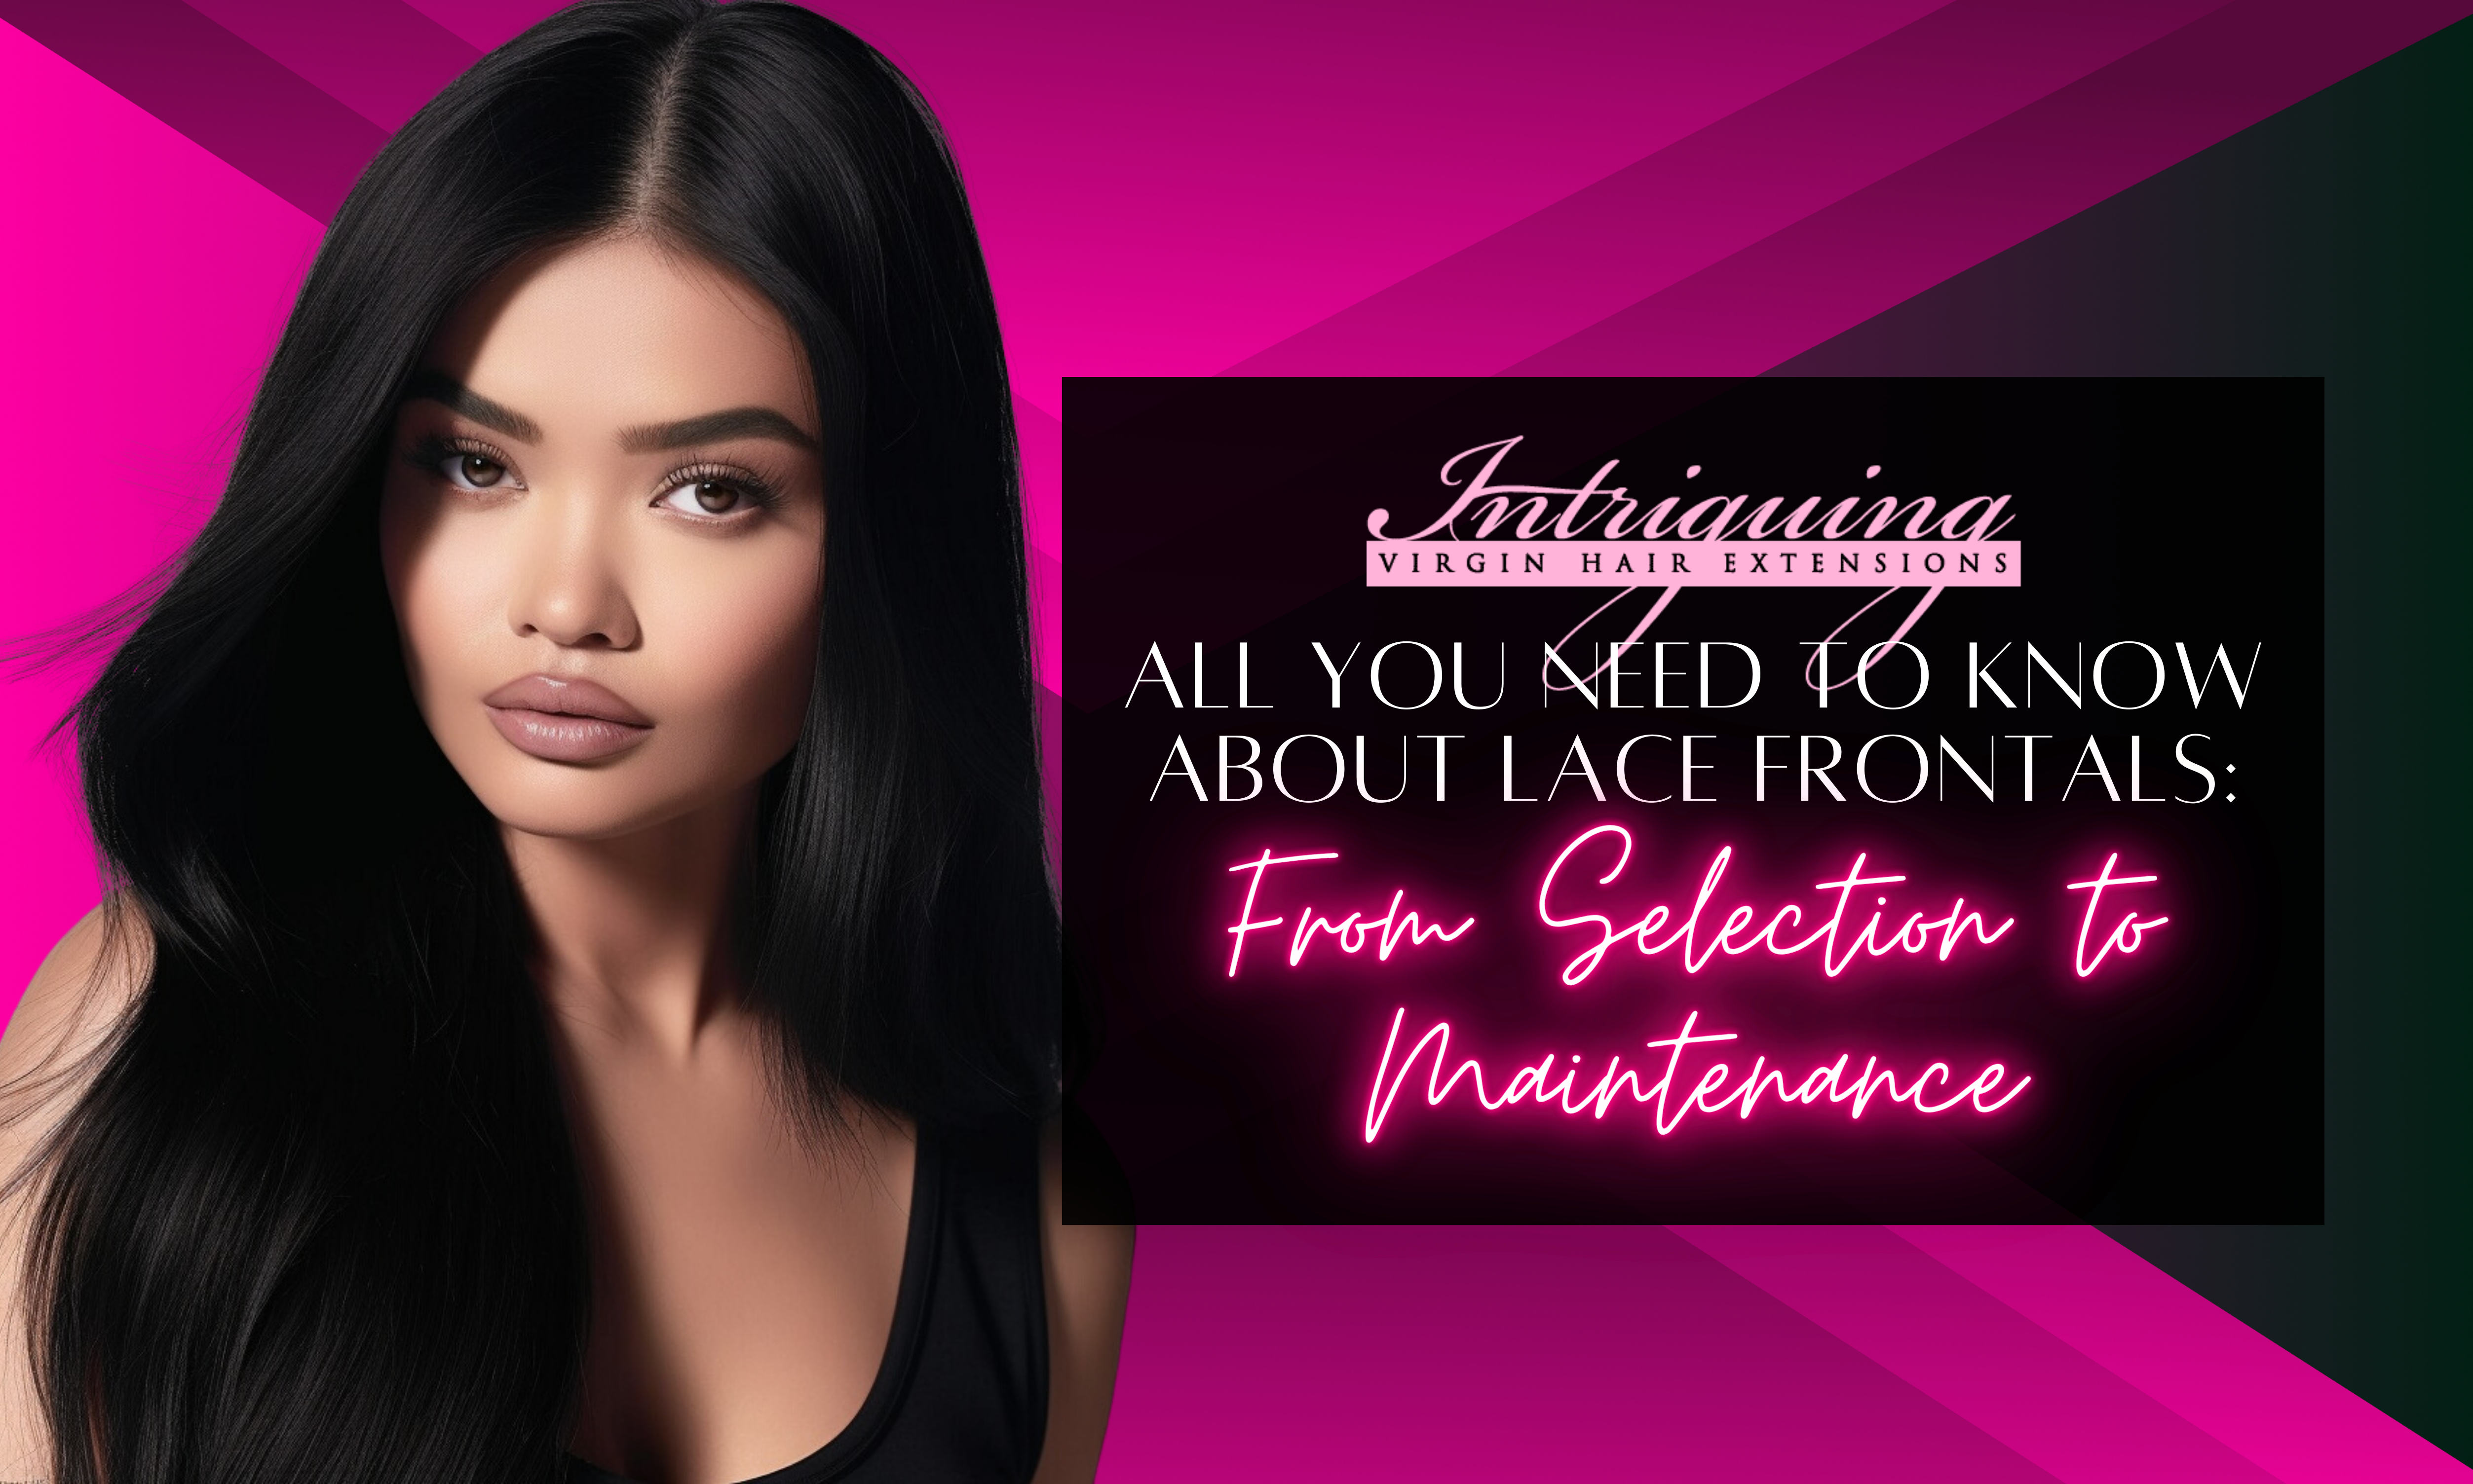 All You Need to Know About Lace Frontals: From Selection to Maintenance